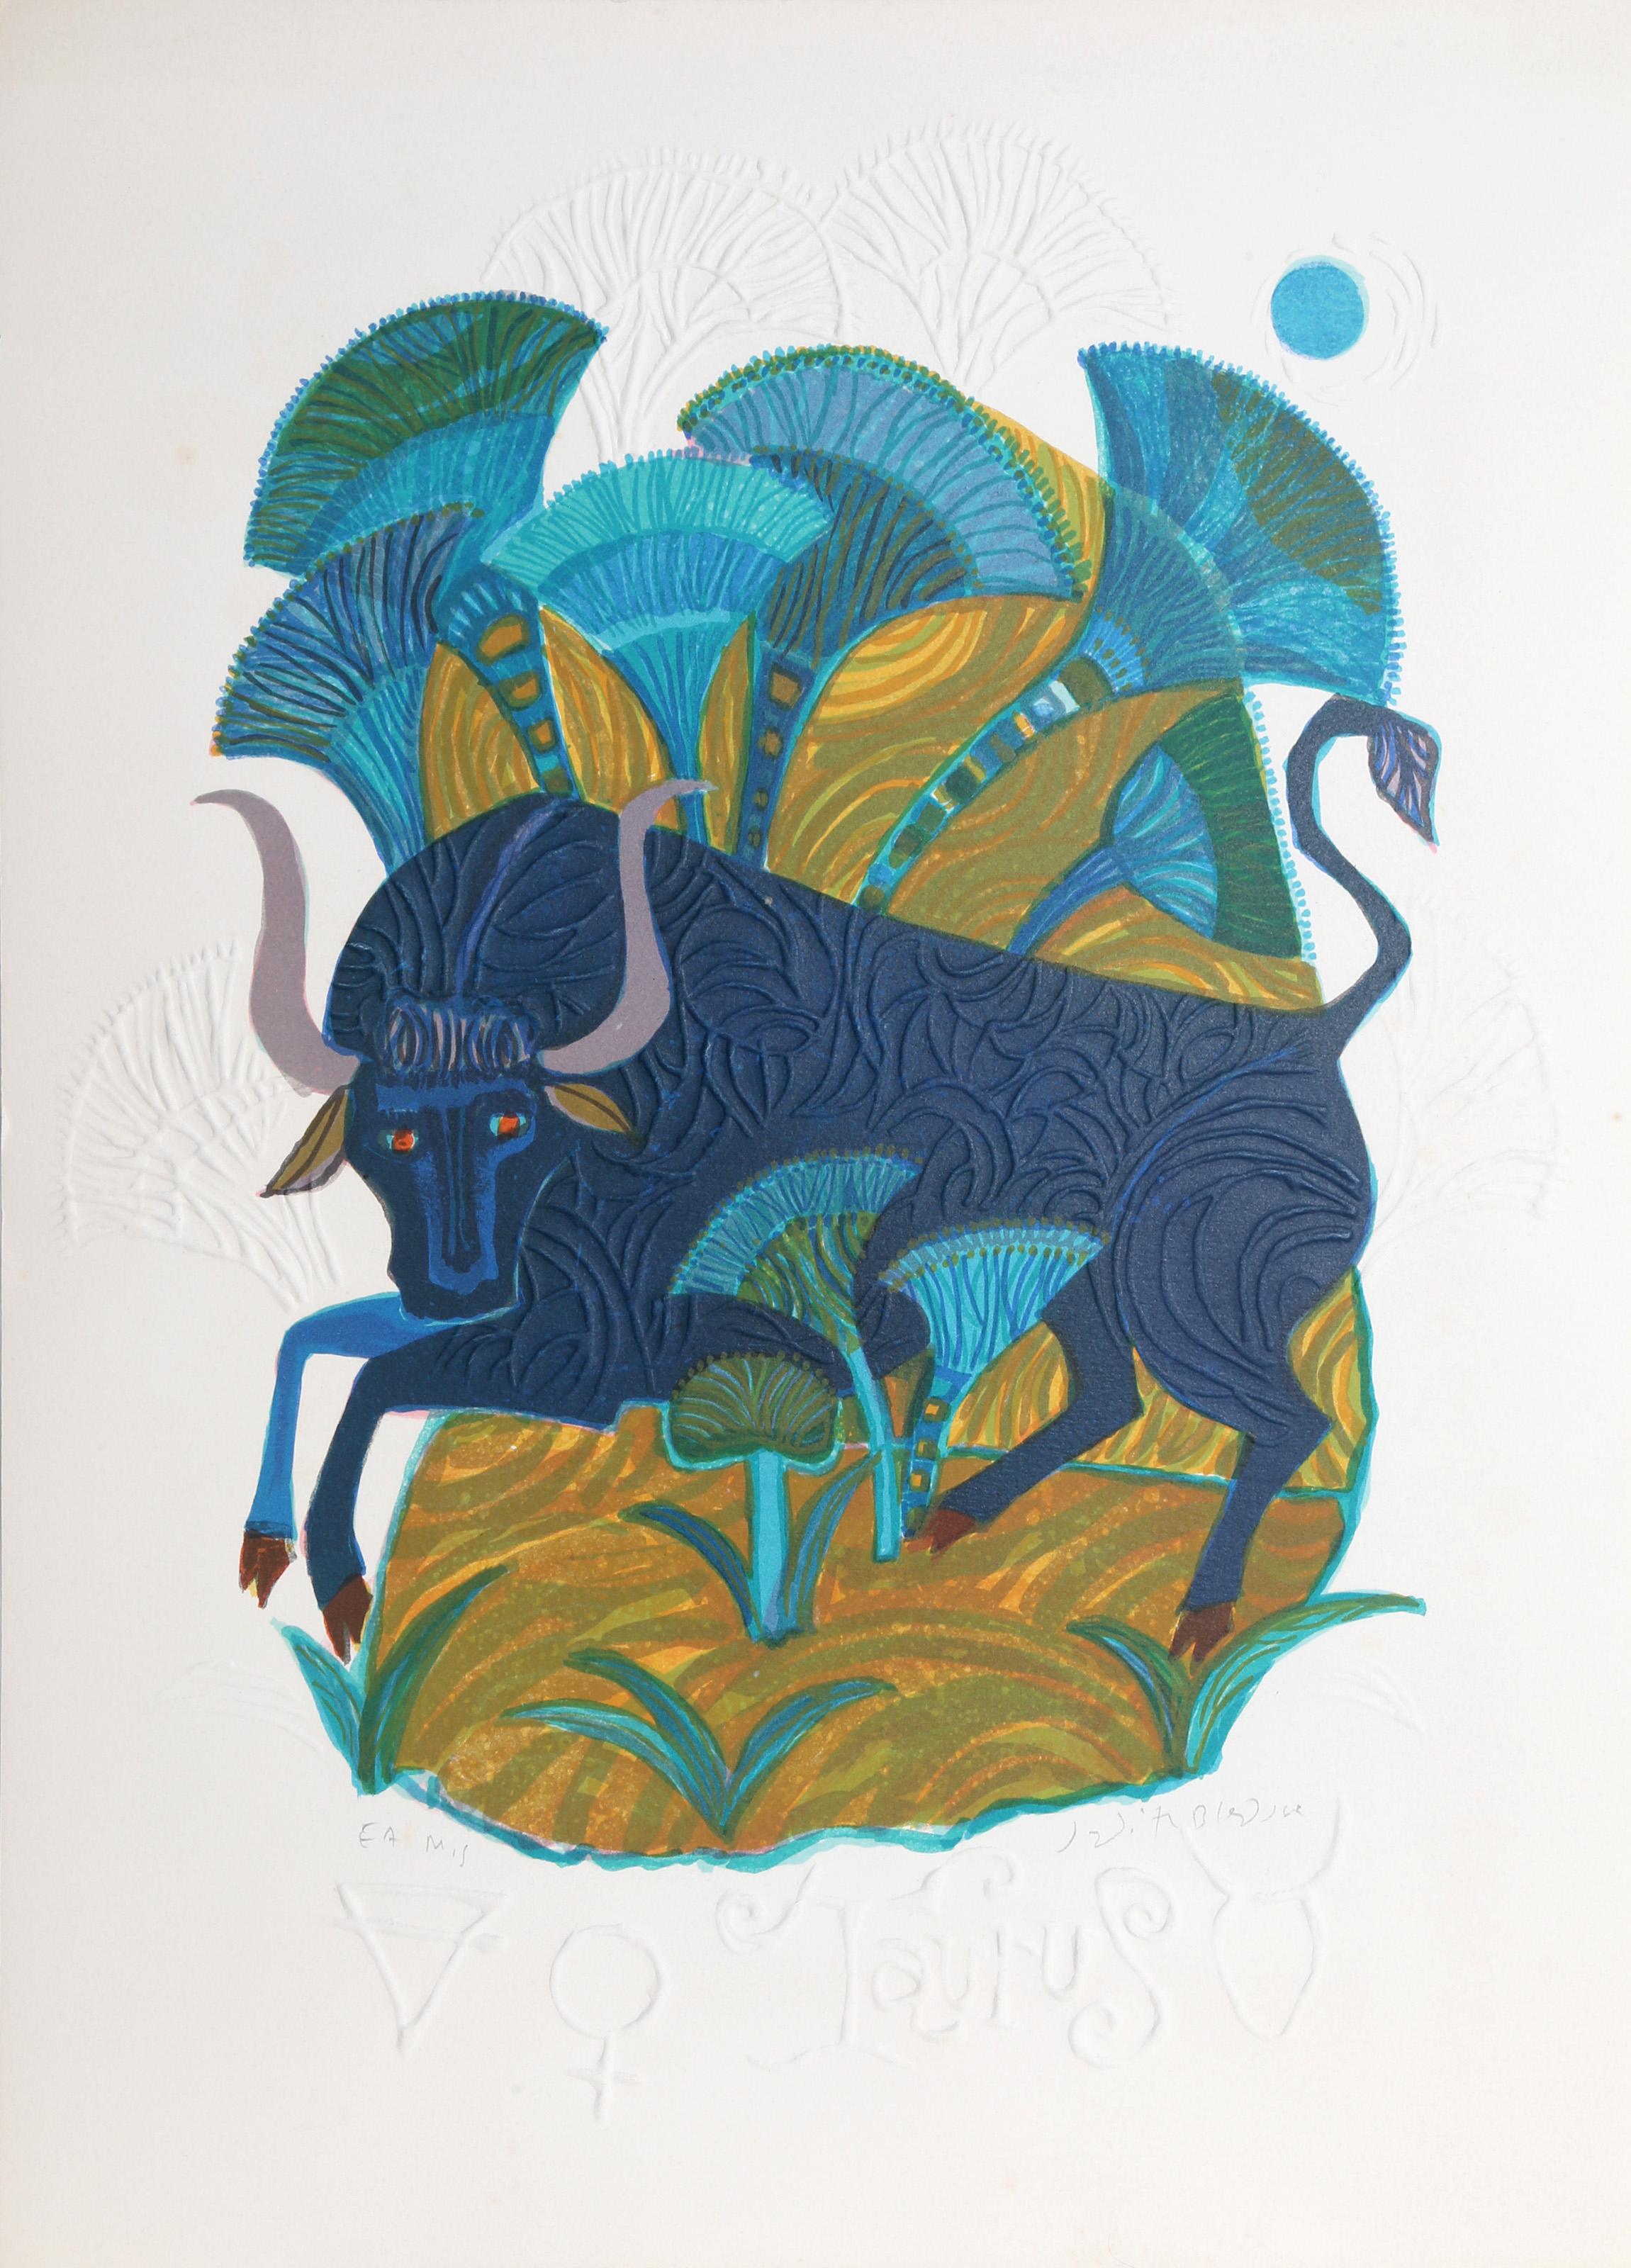 Judith Bledsoe, American (1938 - 2013) -  Taurus from the Zodiac of Dreams Series. Year: circa 1970, Medium: Lithograph with Embossing, signed in pencil, Edition: EA, Size: 21 x 14.5 in. (53.34 x 36.83 cm), Description: Surrounded by plants in